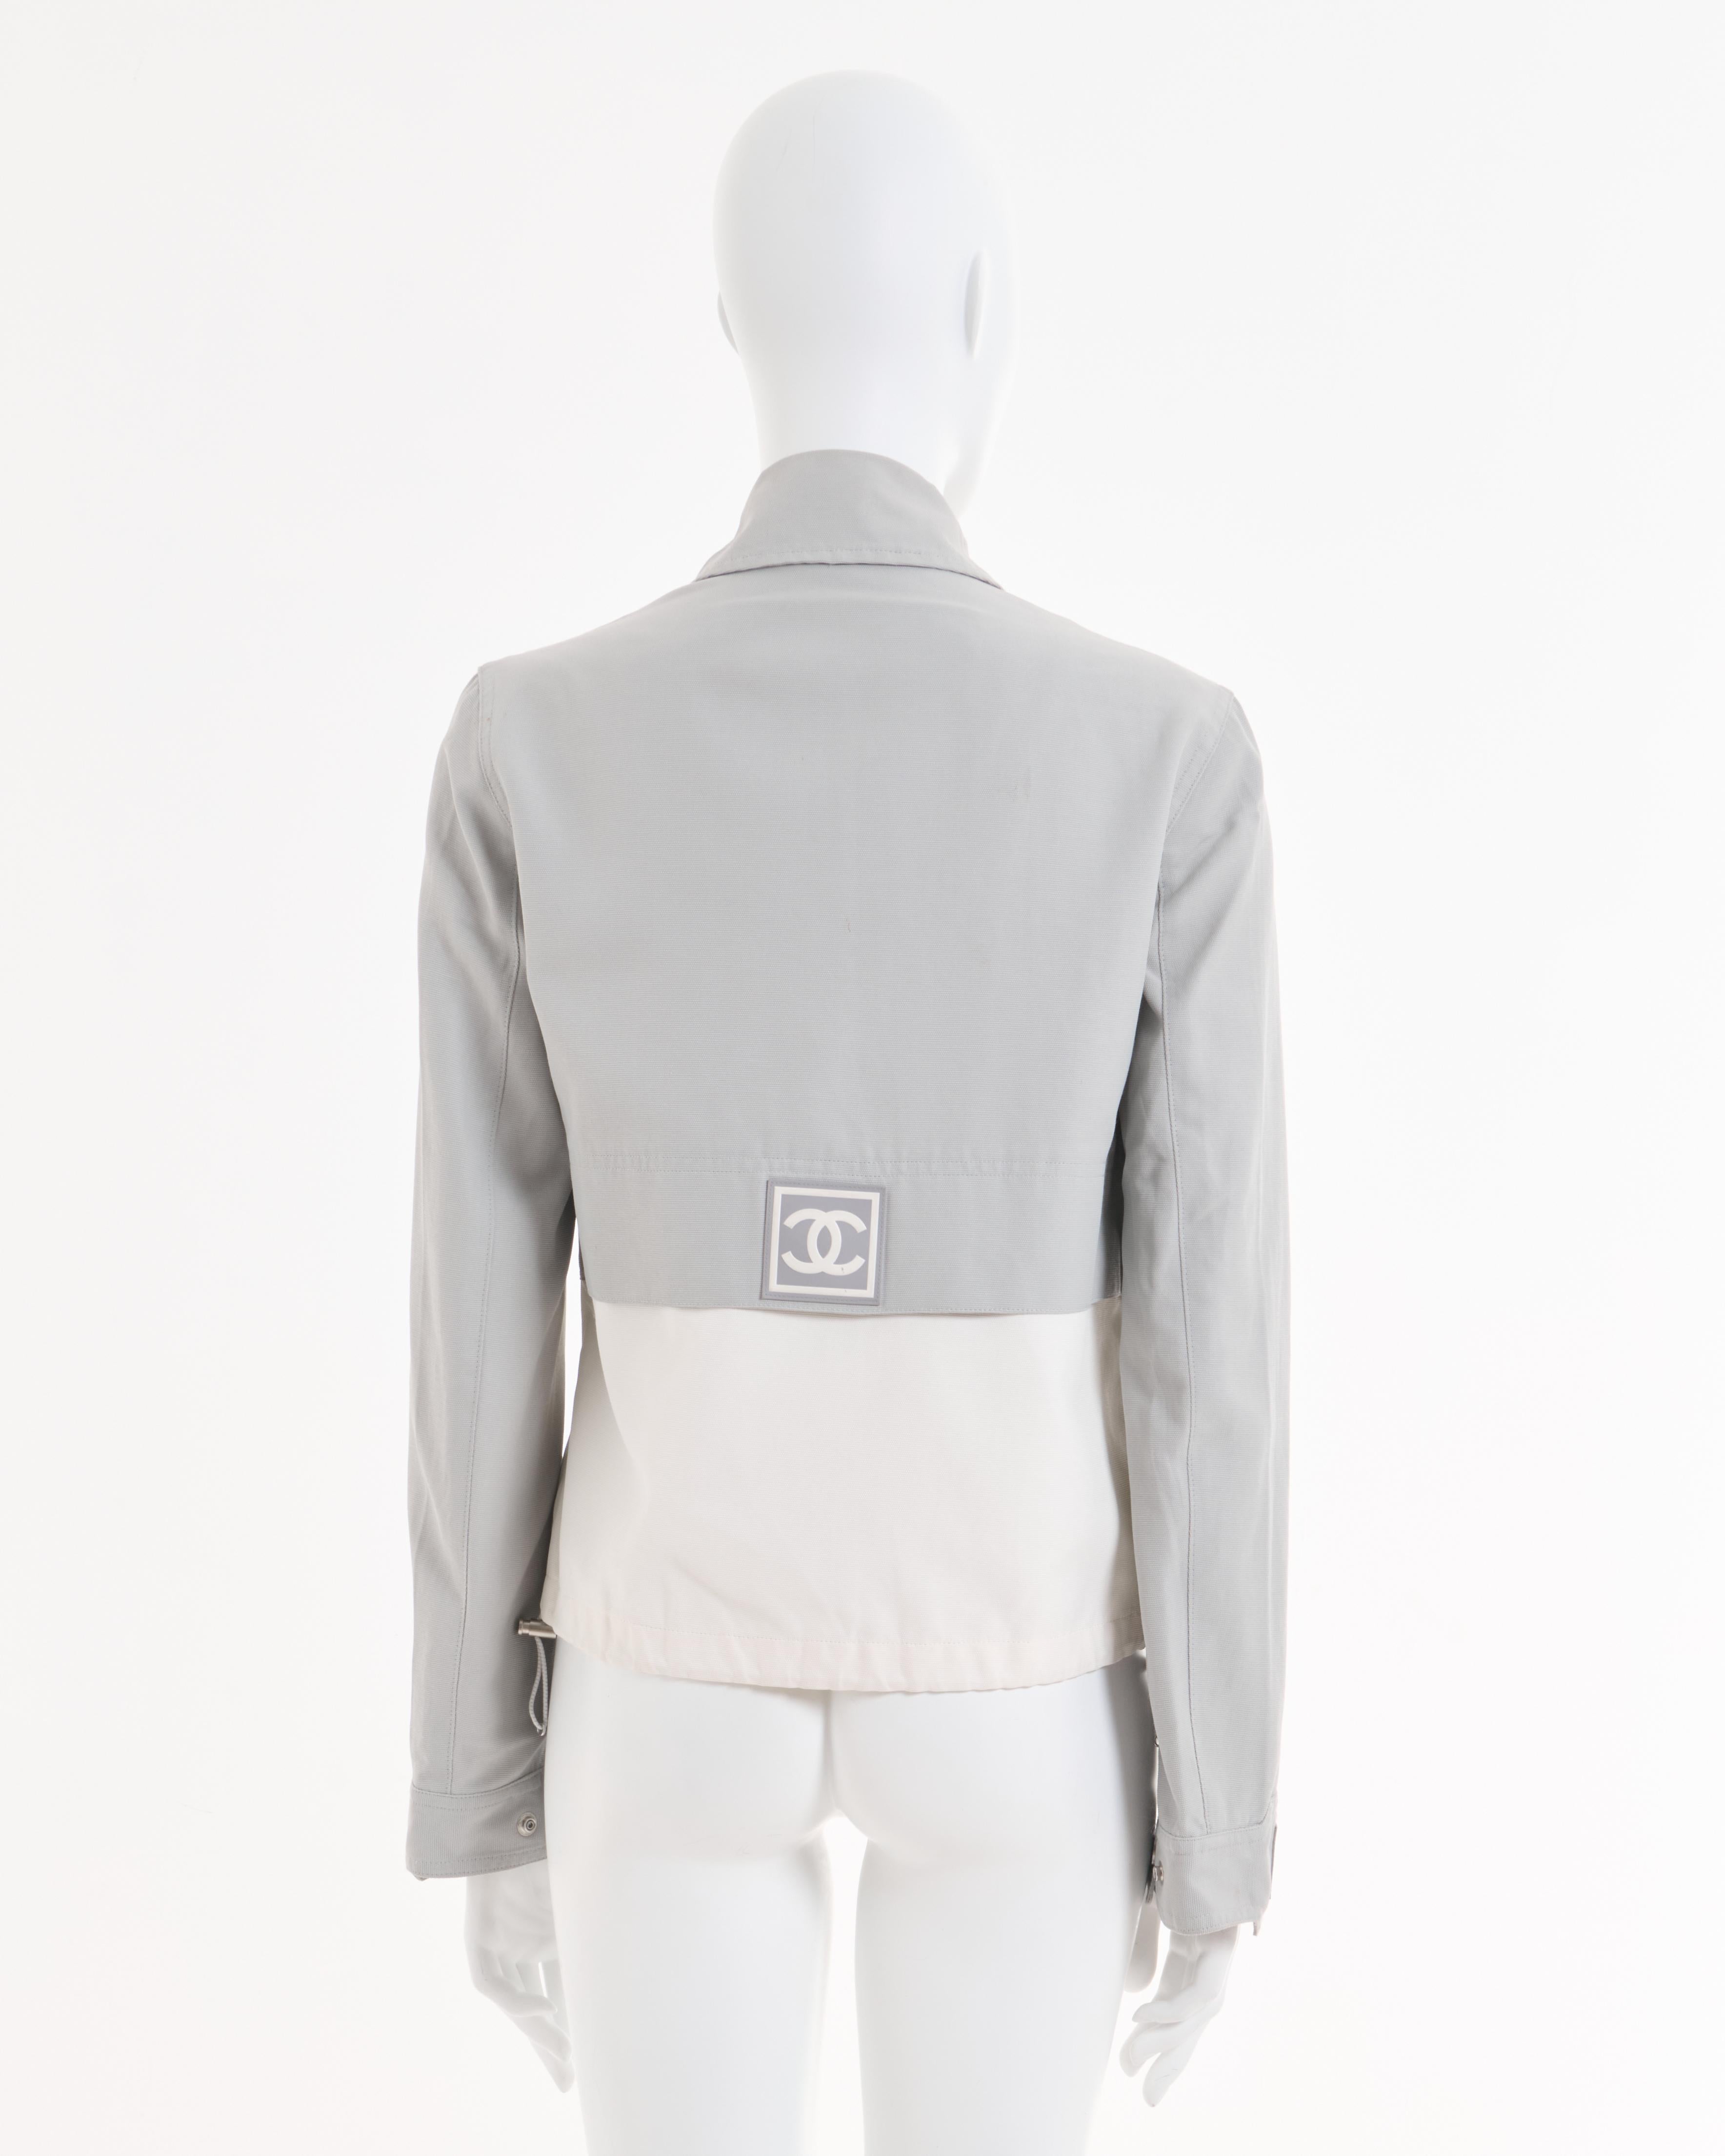 Women's Chanel by Karl Lagerfeld F/W 2001 Dove gray and white zip-up sport jacket  For Sale